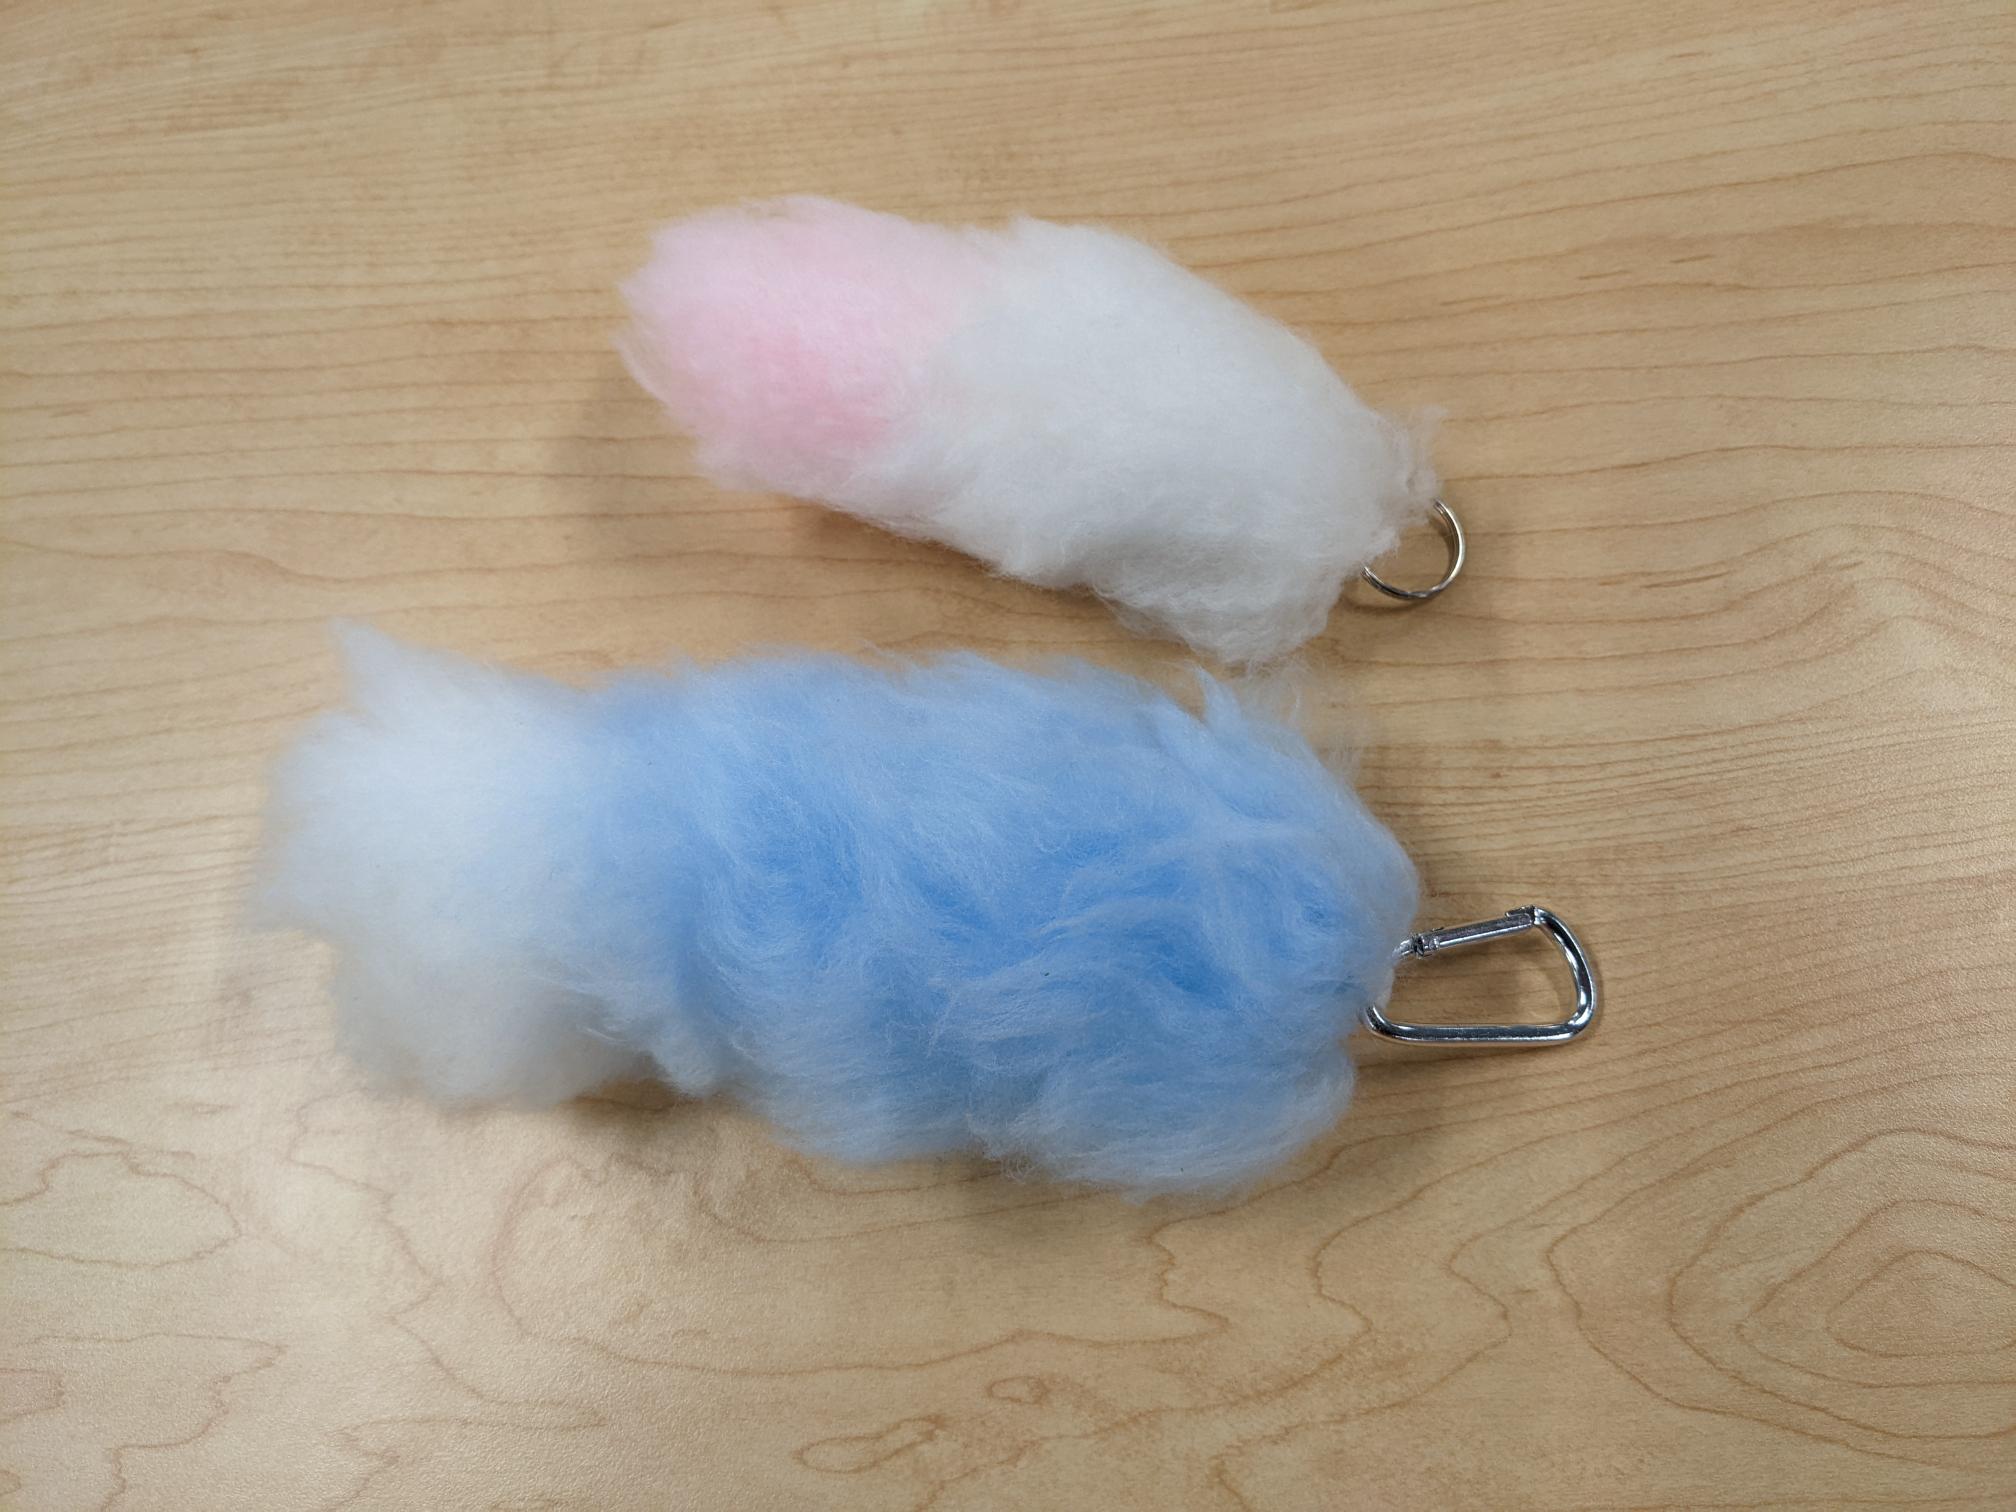 pink and white foxtail keychain and white and blue foxtail keychain